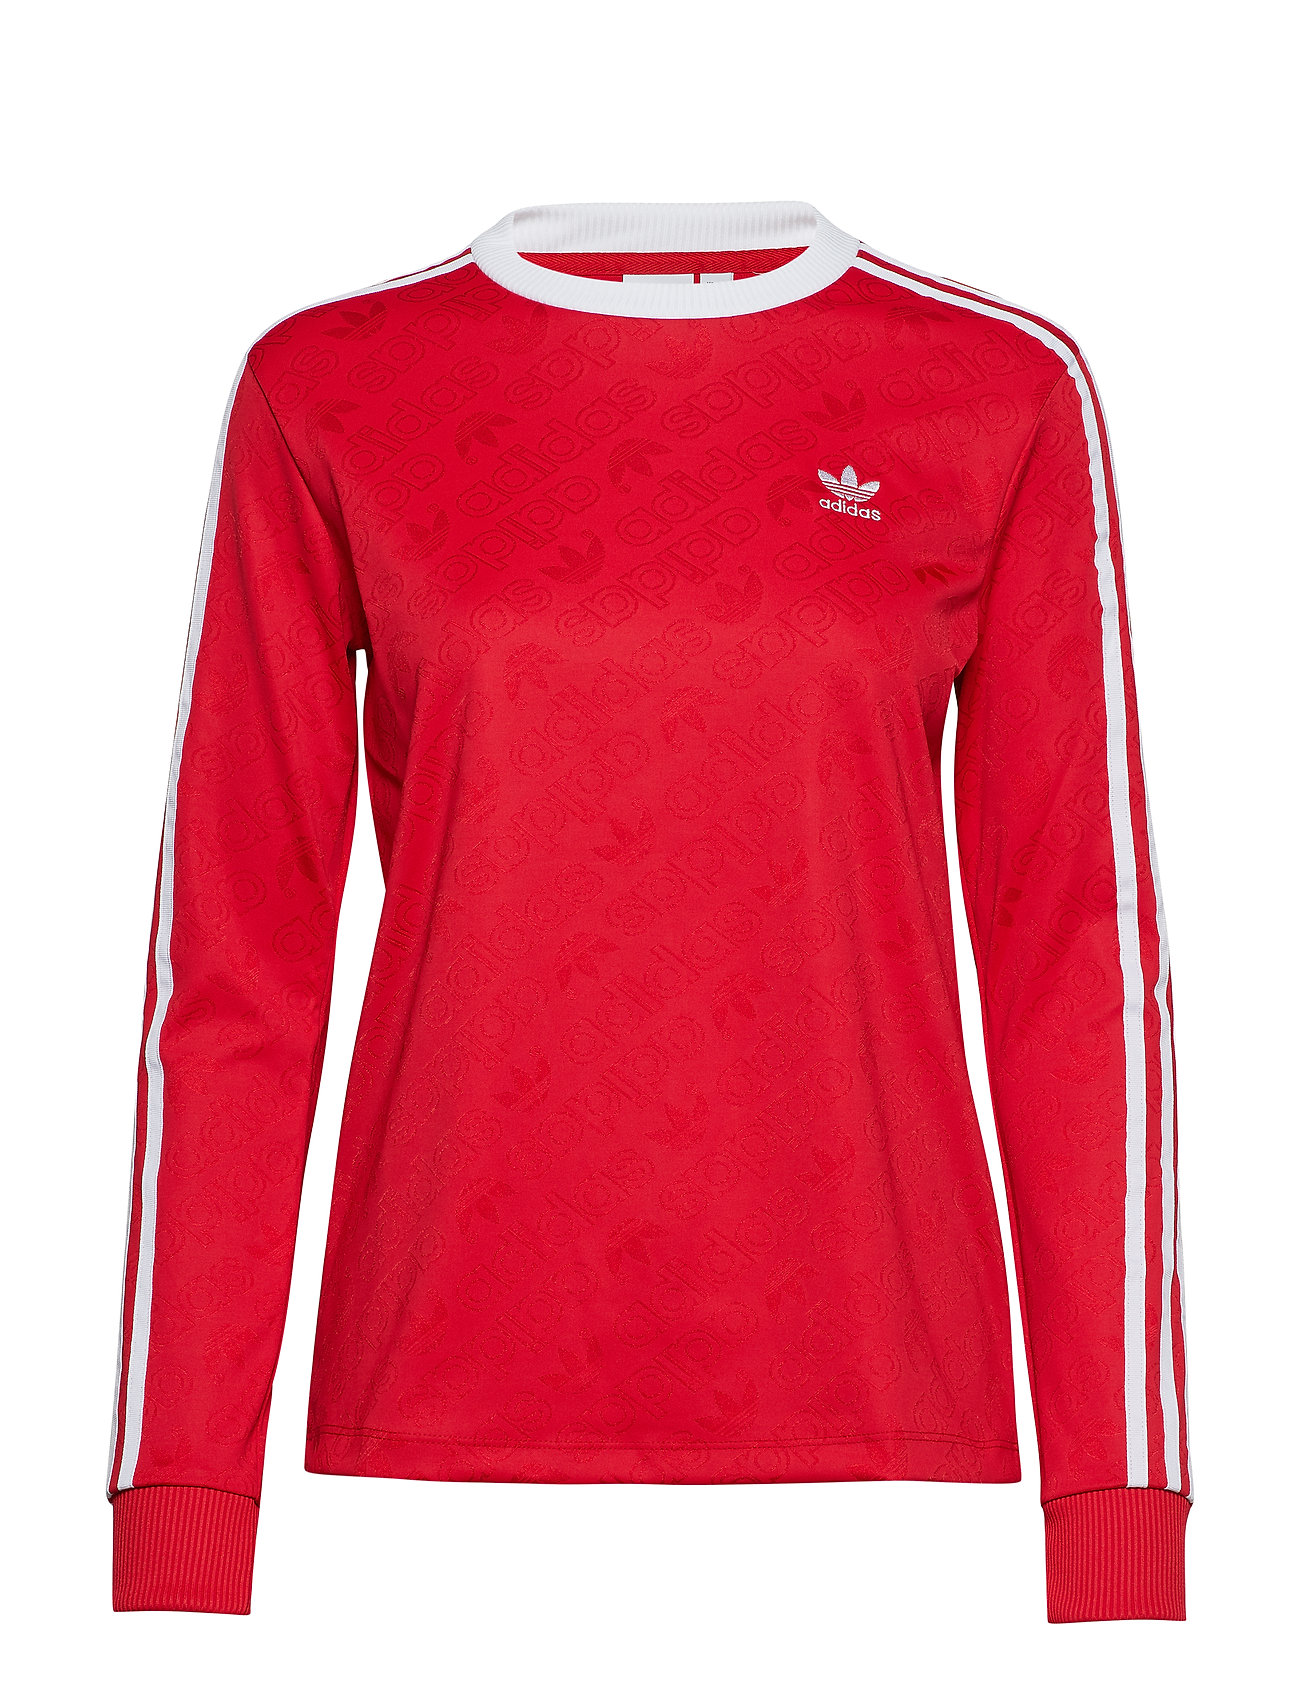 adidas Originals 3 Str Ls Tee (Scarle), (27.97 €) | Large selection of  outlet-styles | Booztlet.com